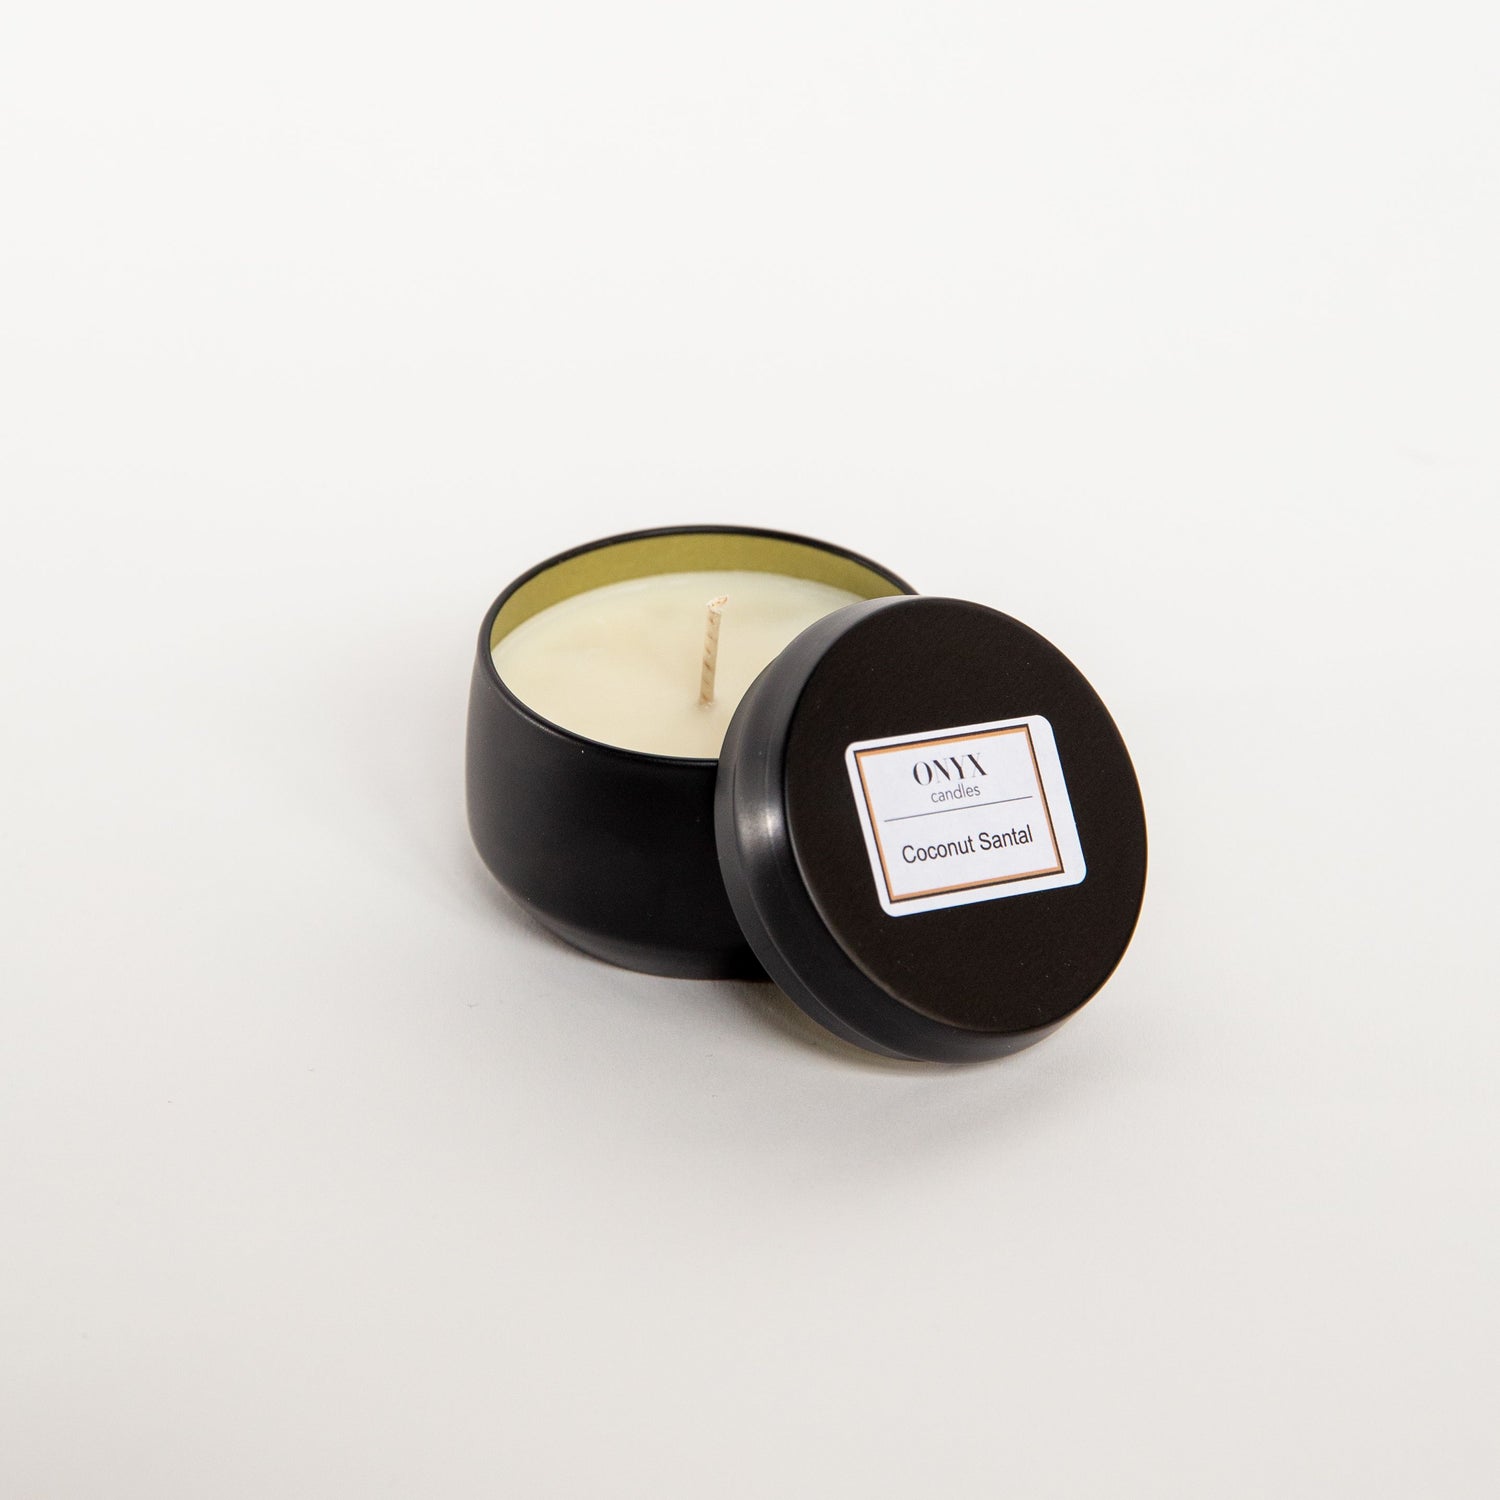 Coconut and Santal candle in a 4 oz matte black tin